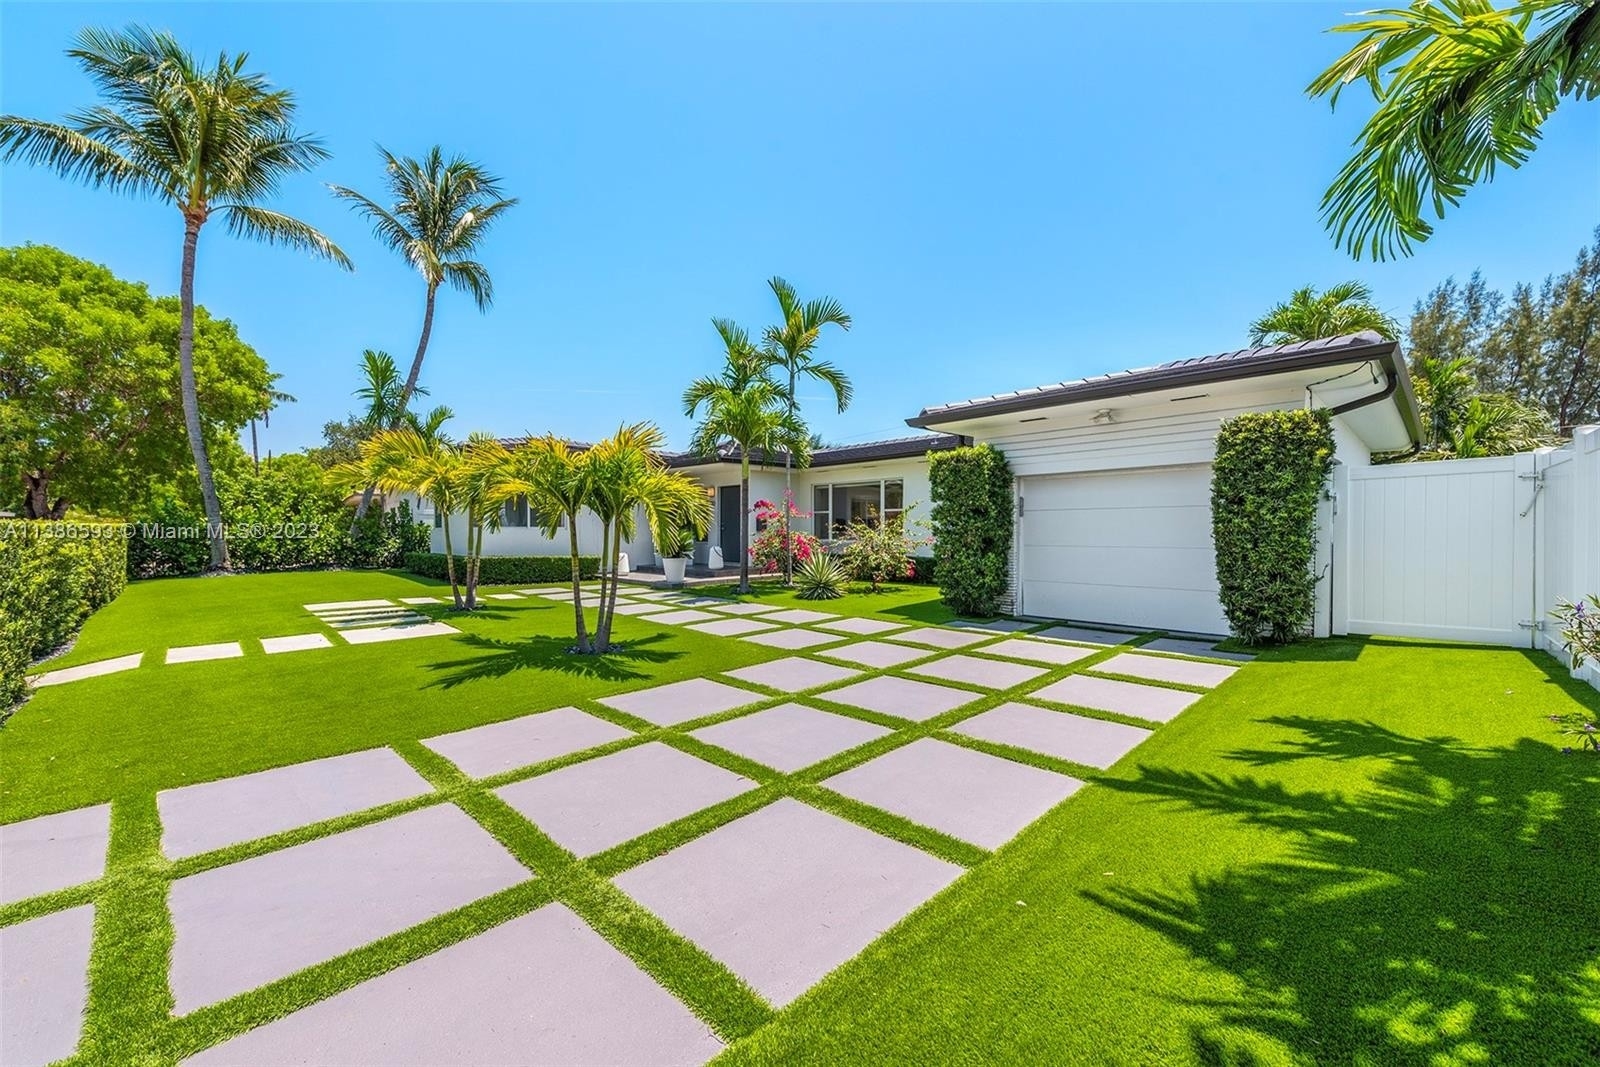 Single Family Home for Sale at Normandy Shores, Miami Beach, FL 33141